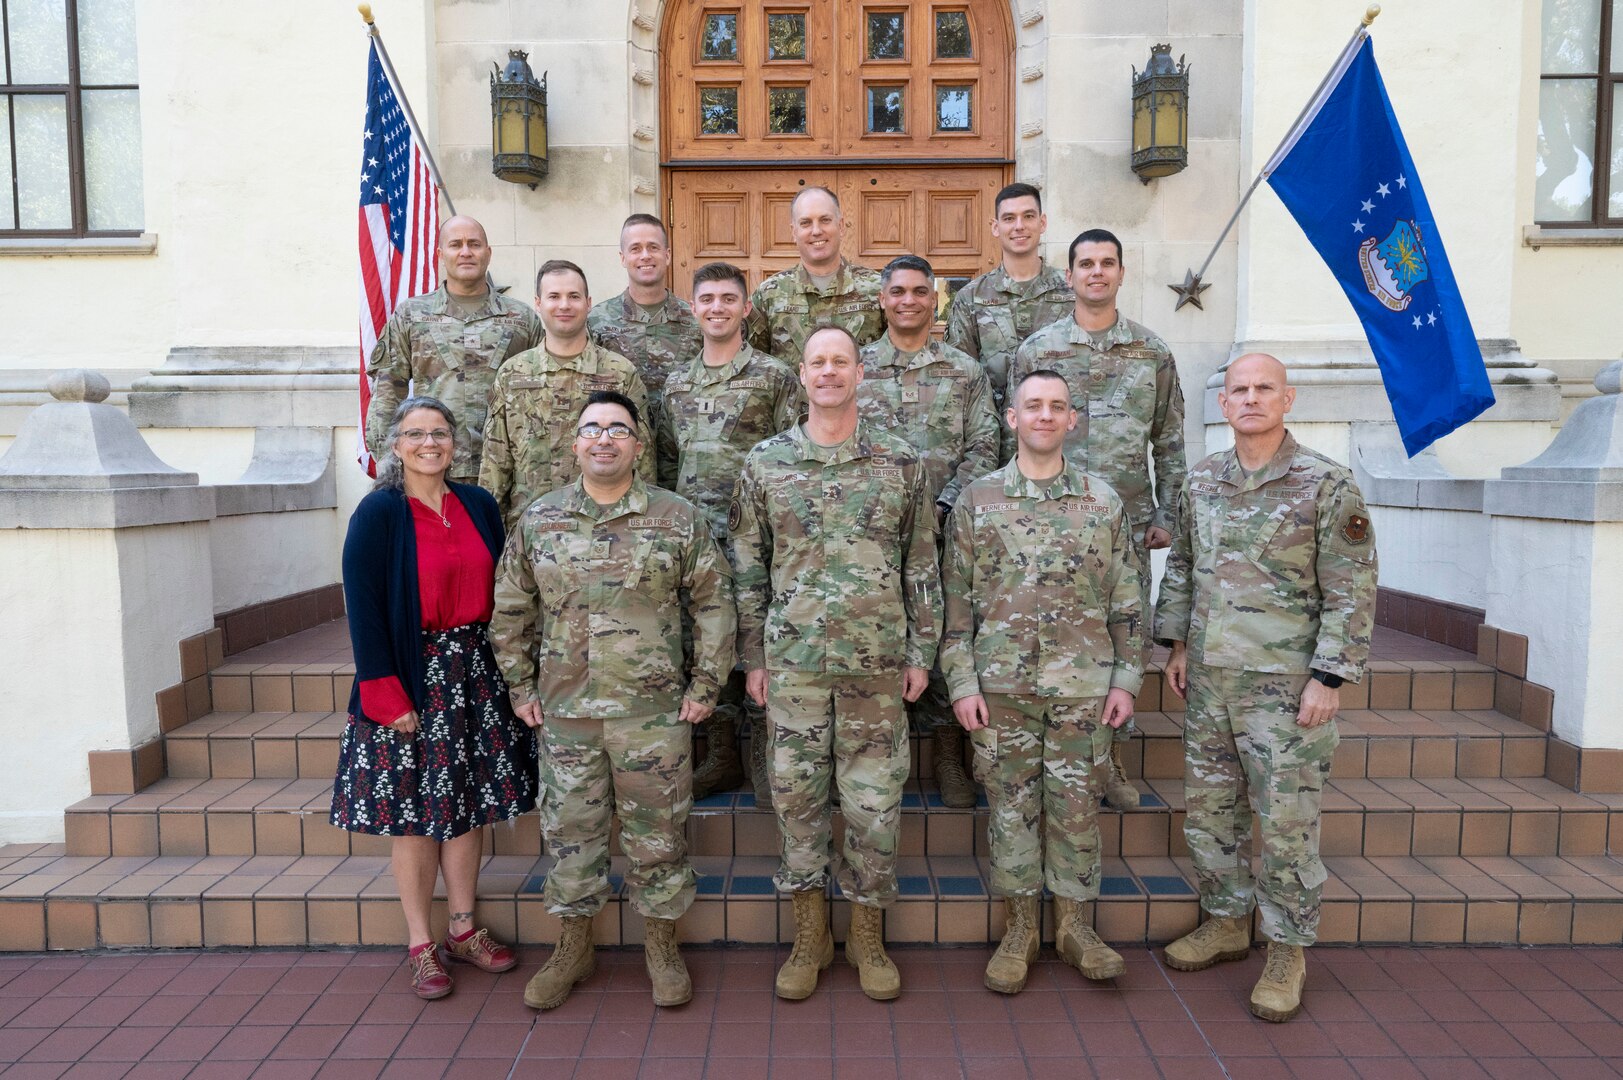 Airmen from across Air Education and Training Command stand alongside headquarters AETC leaders, after participating in the 2023 AETC Spark Tank selection panel at Joint Base San Antonio-Randolph, Texas, Oct. 19, 2022